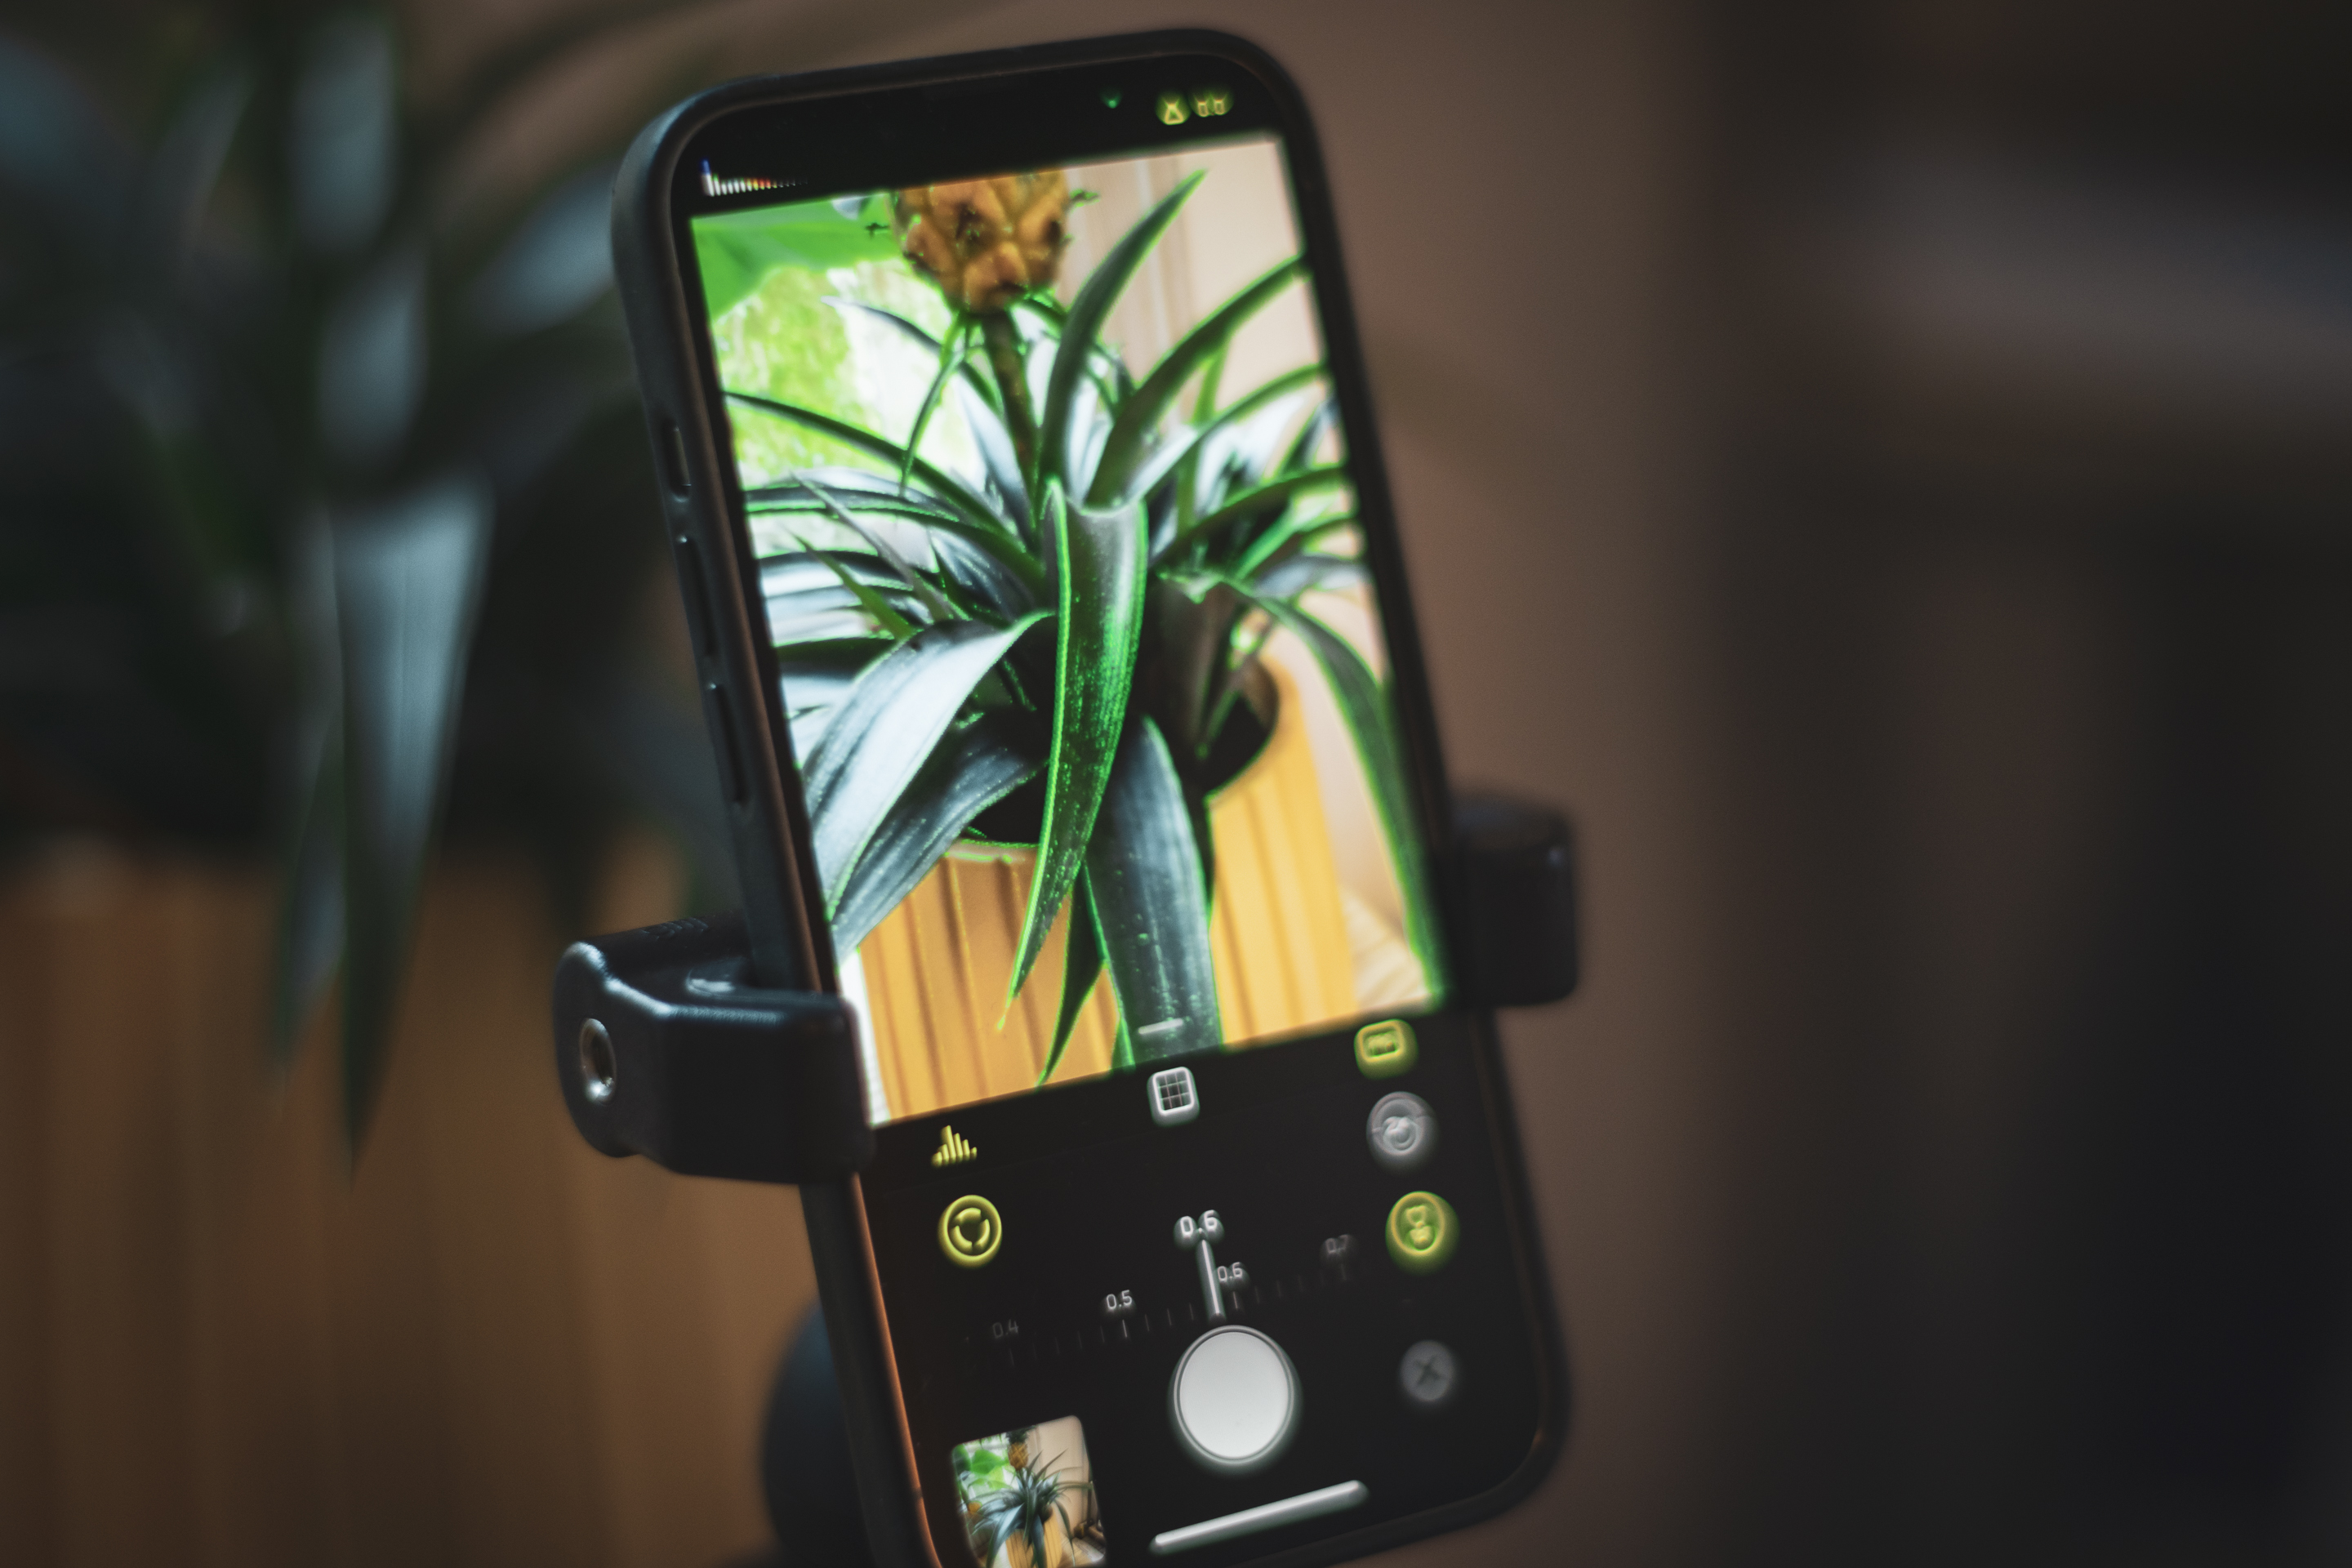 Halide on X: Tap AF to disable autofocus and enter manual focus mode.  Then tap the flower to enable Macro Mode. Smart things start happening  here: Halide finds the closest-focusing lens on